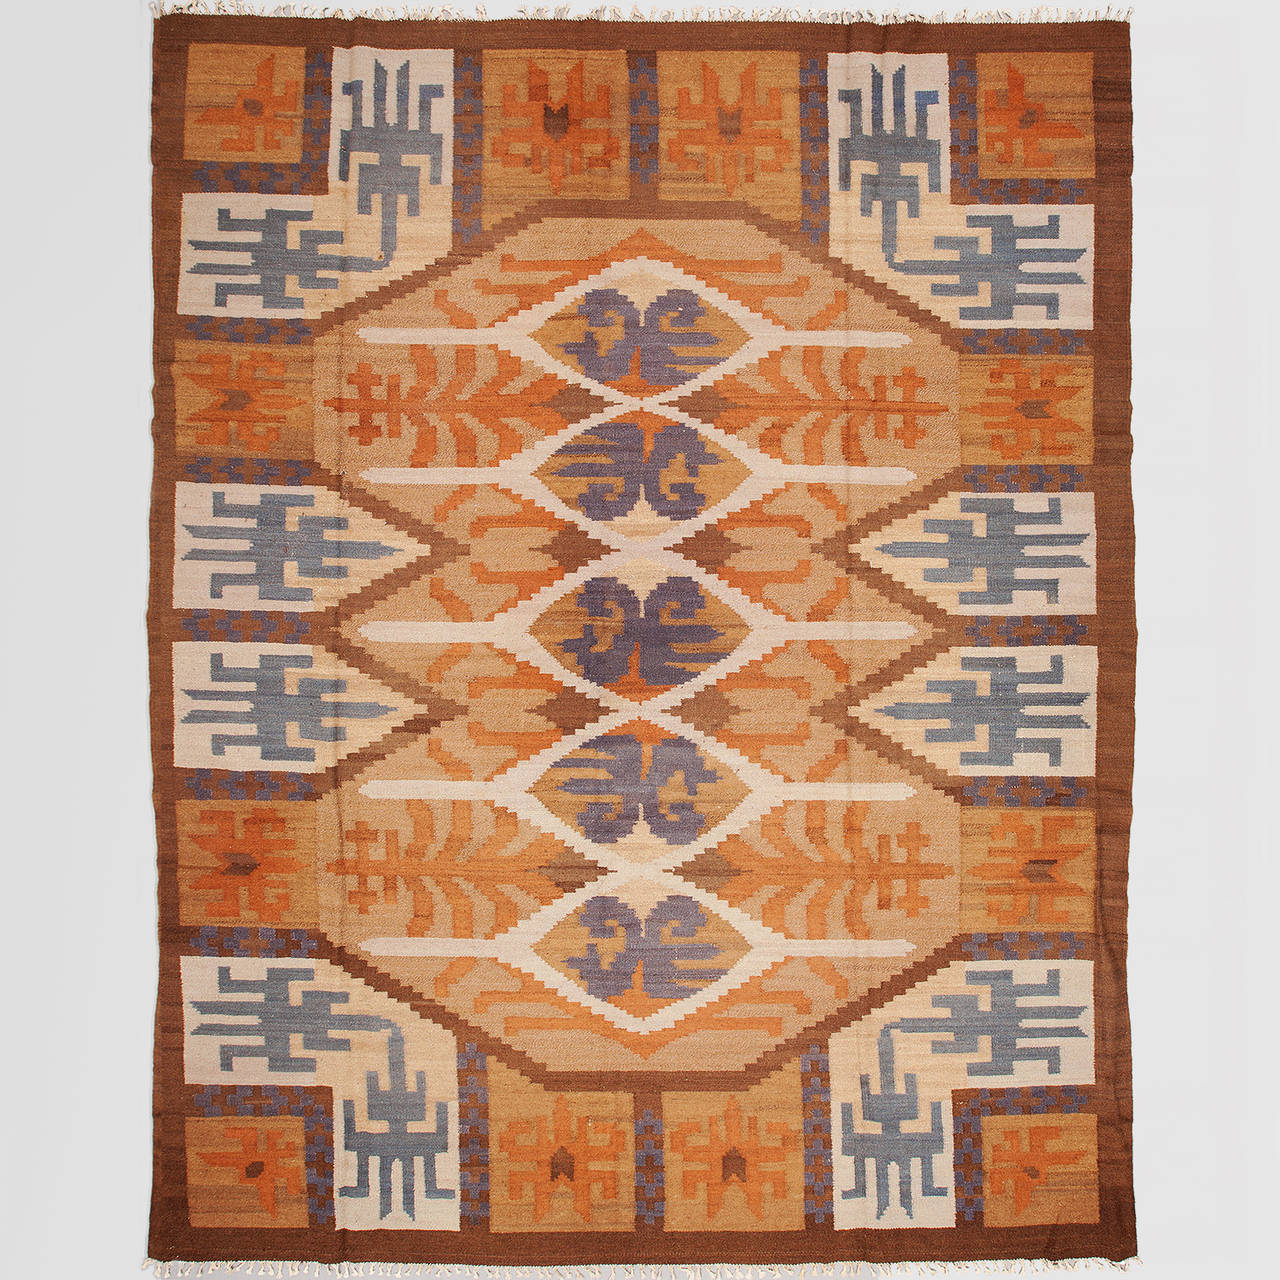 Large Swedish art deco flat weave (Rölakan) rug with geometric design in blues, orange, cream and brown. Dimension  13’ x 10’3”, Just professional cleaned, minor wear and some small spots.